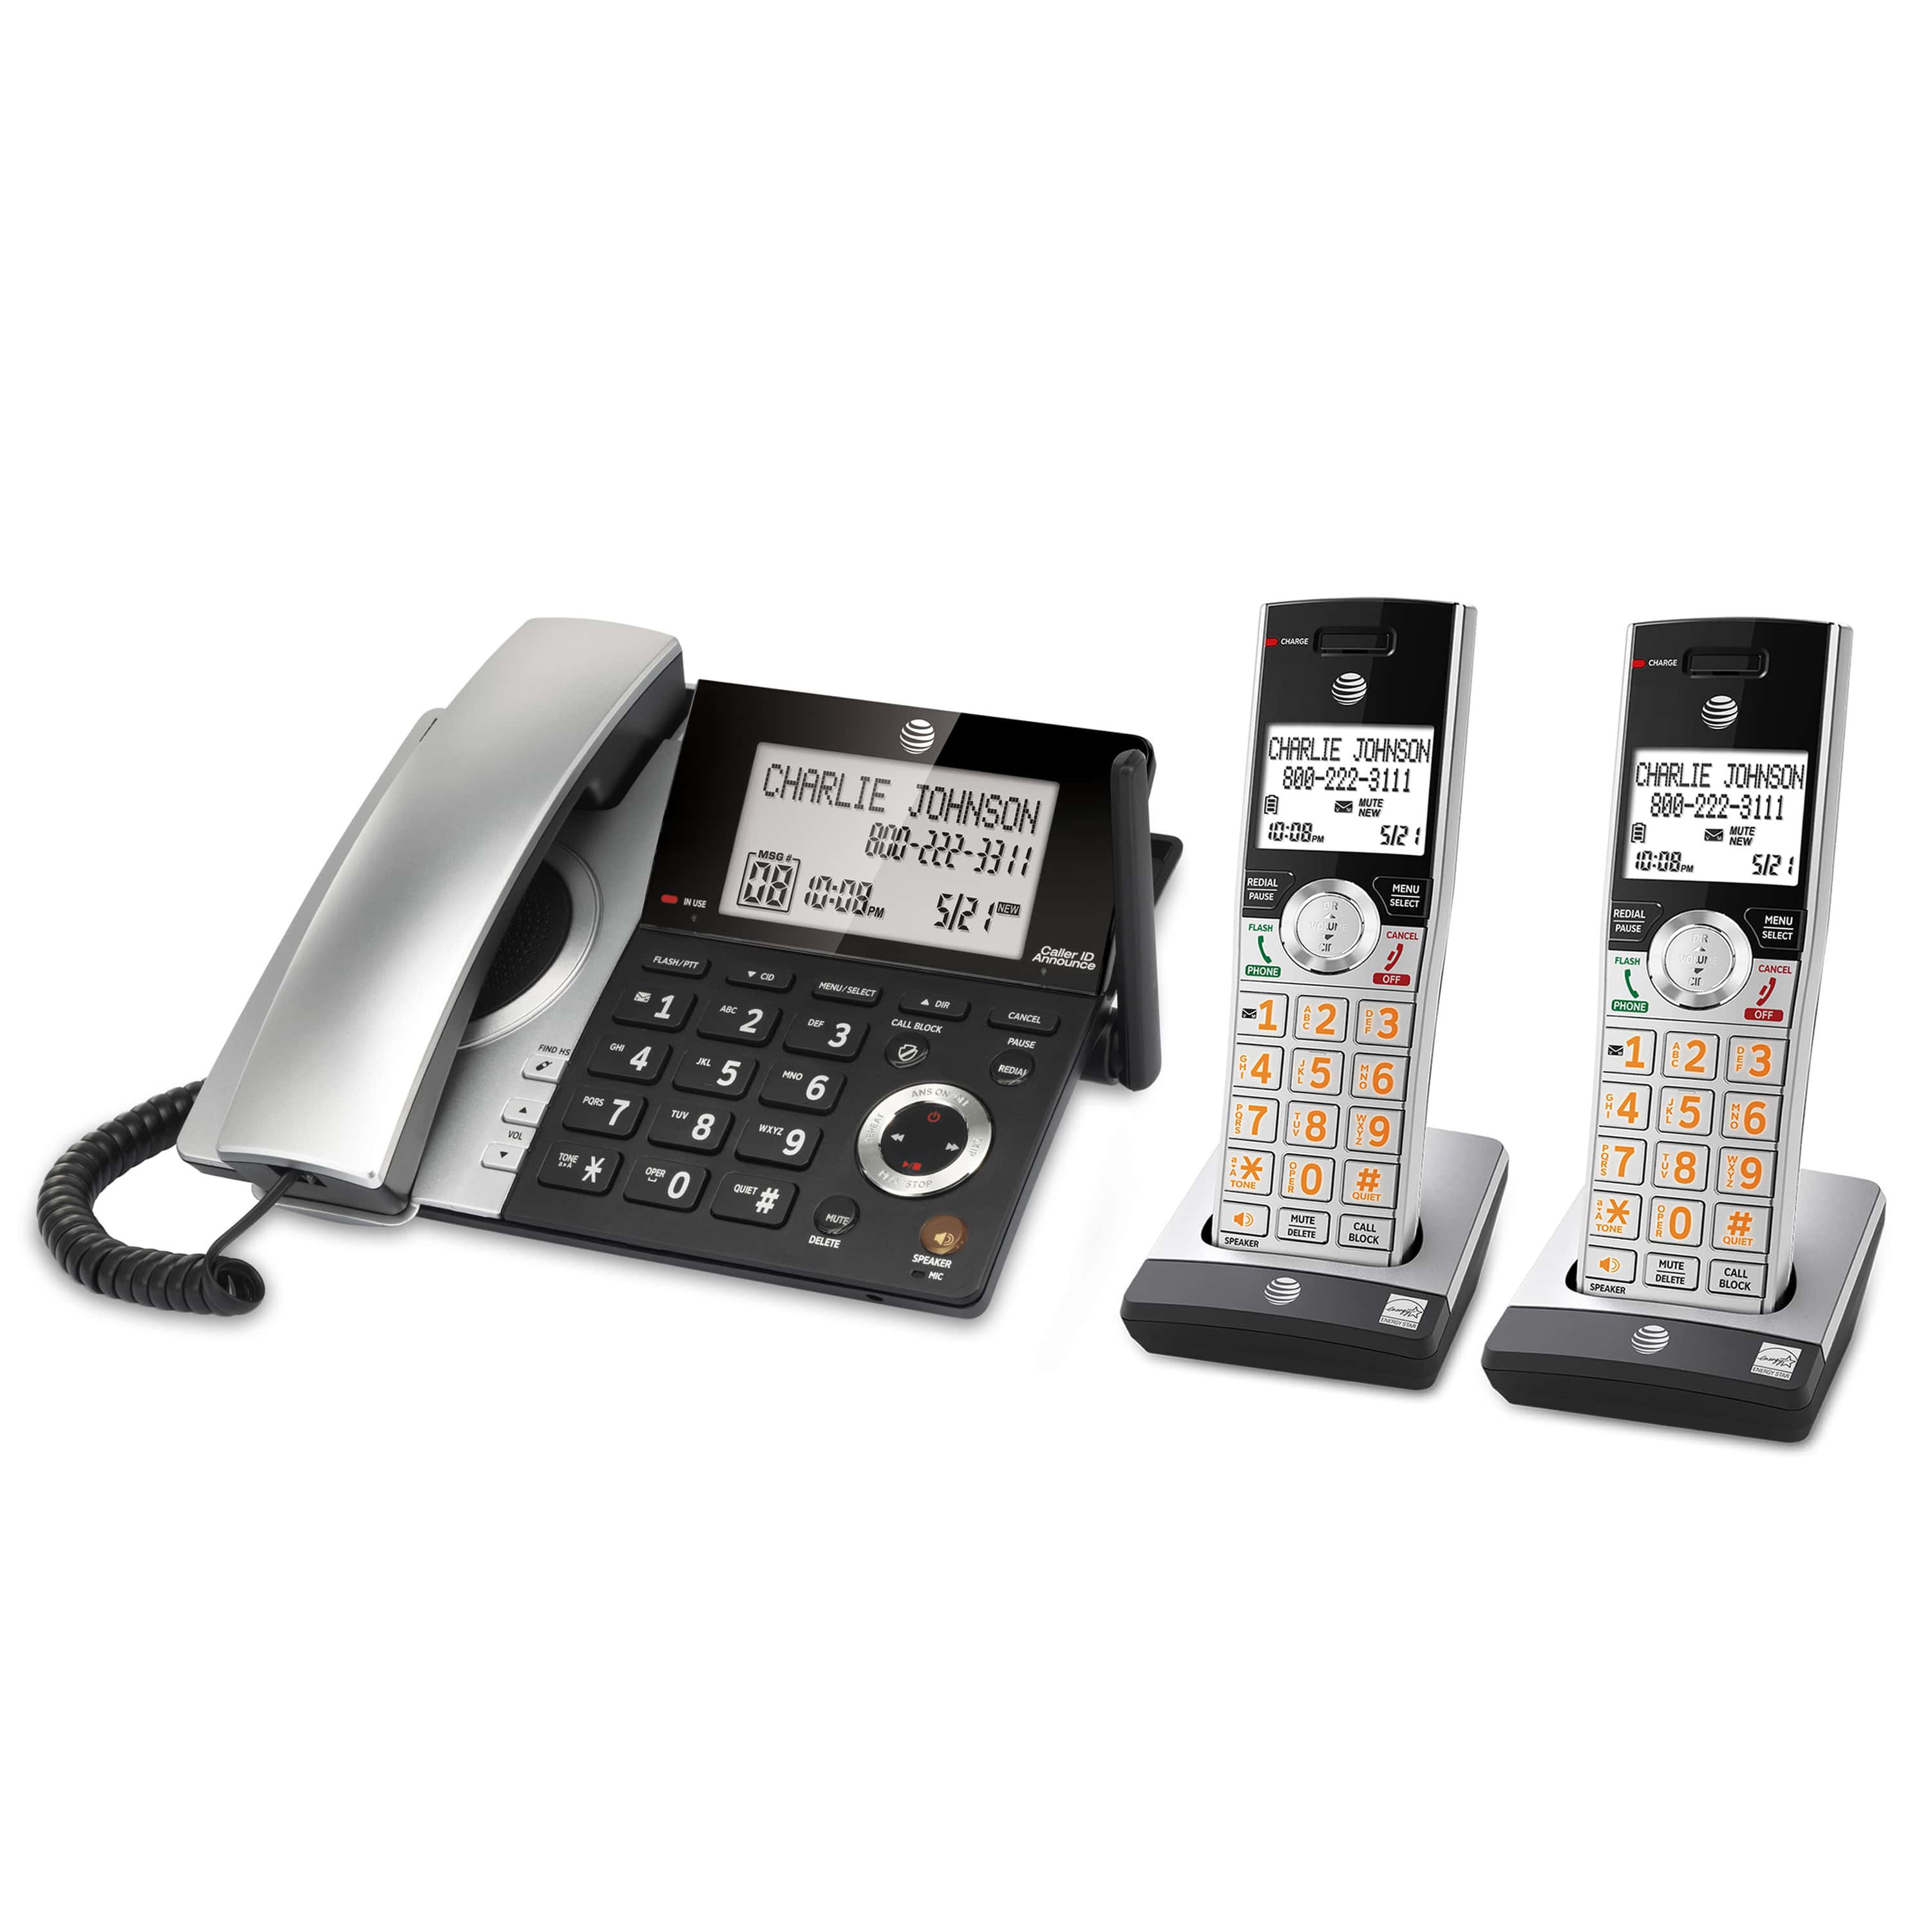 2 handset corded/cordless phone system with smart call blocker - view 2